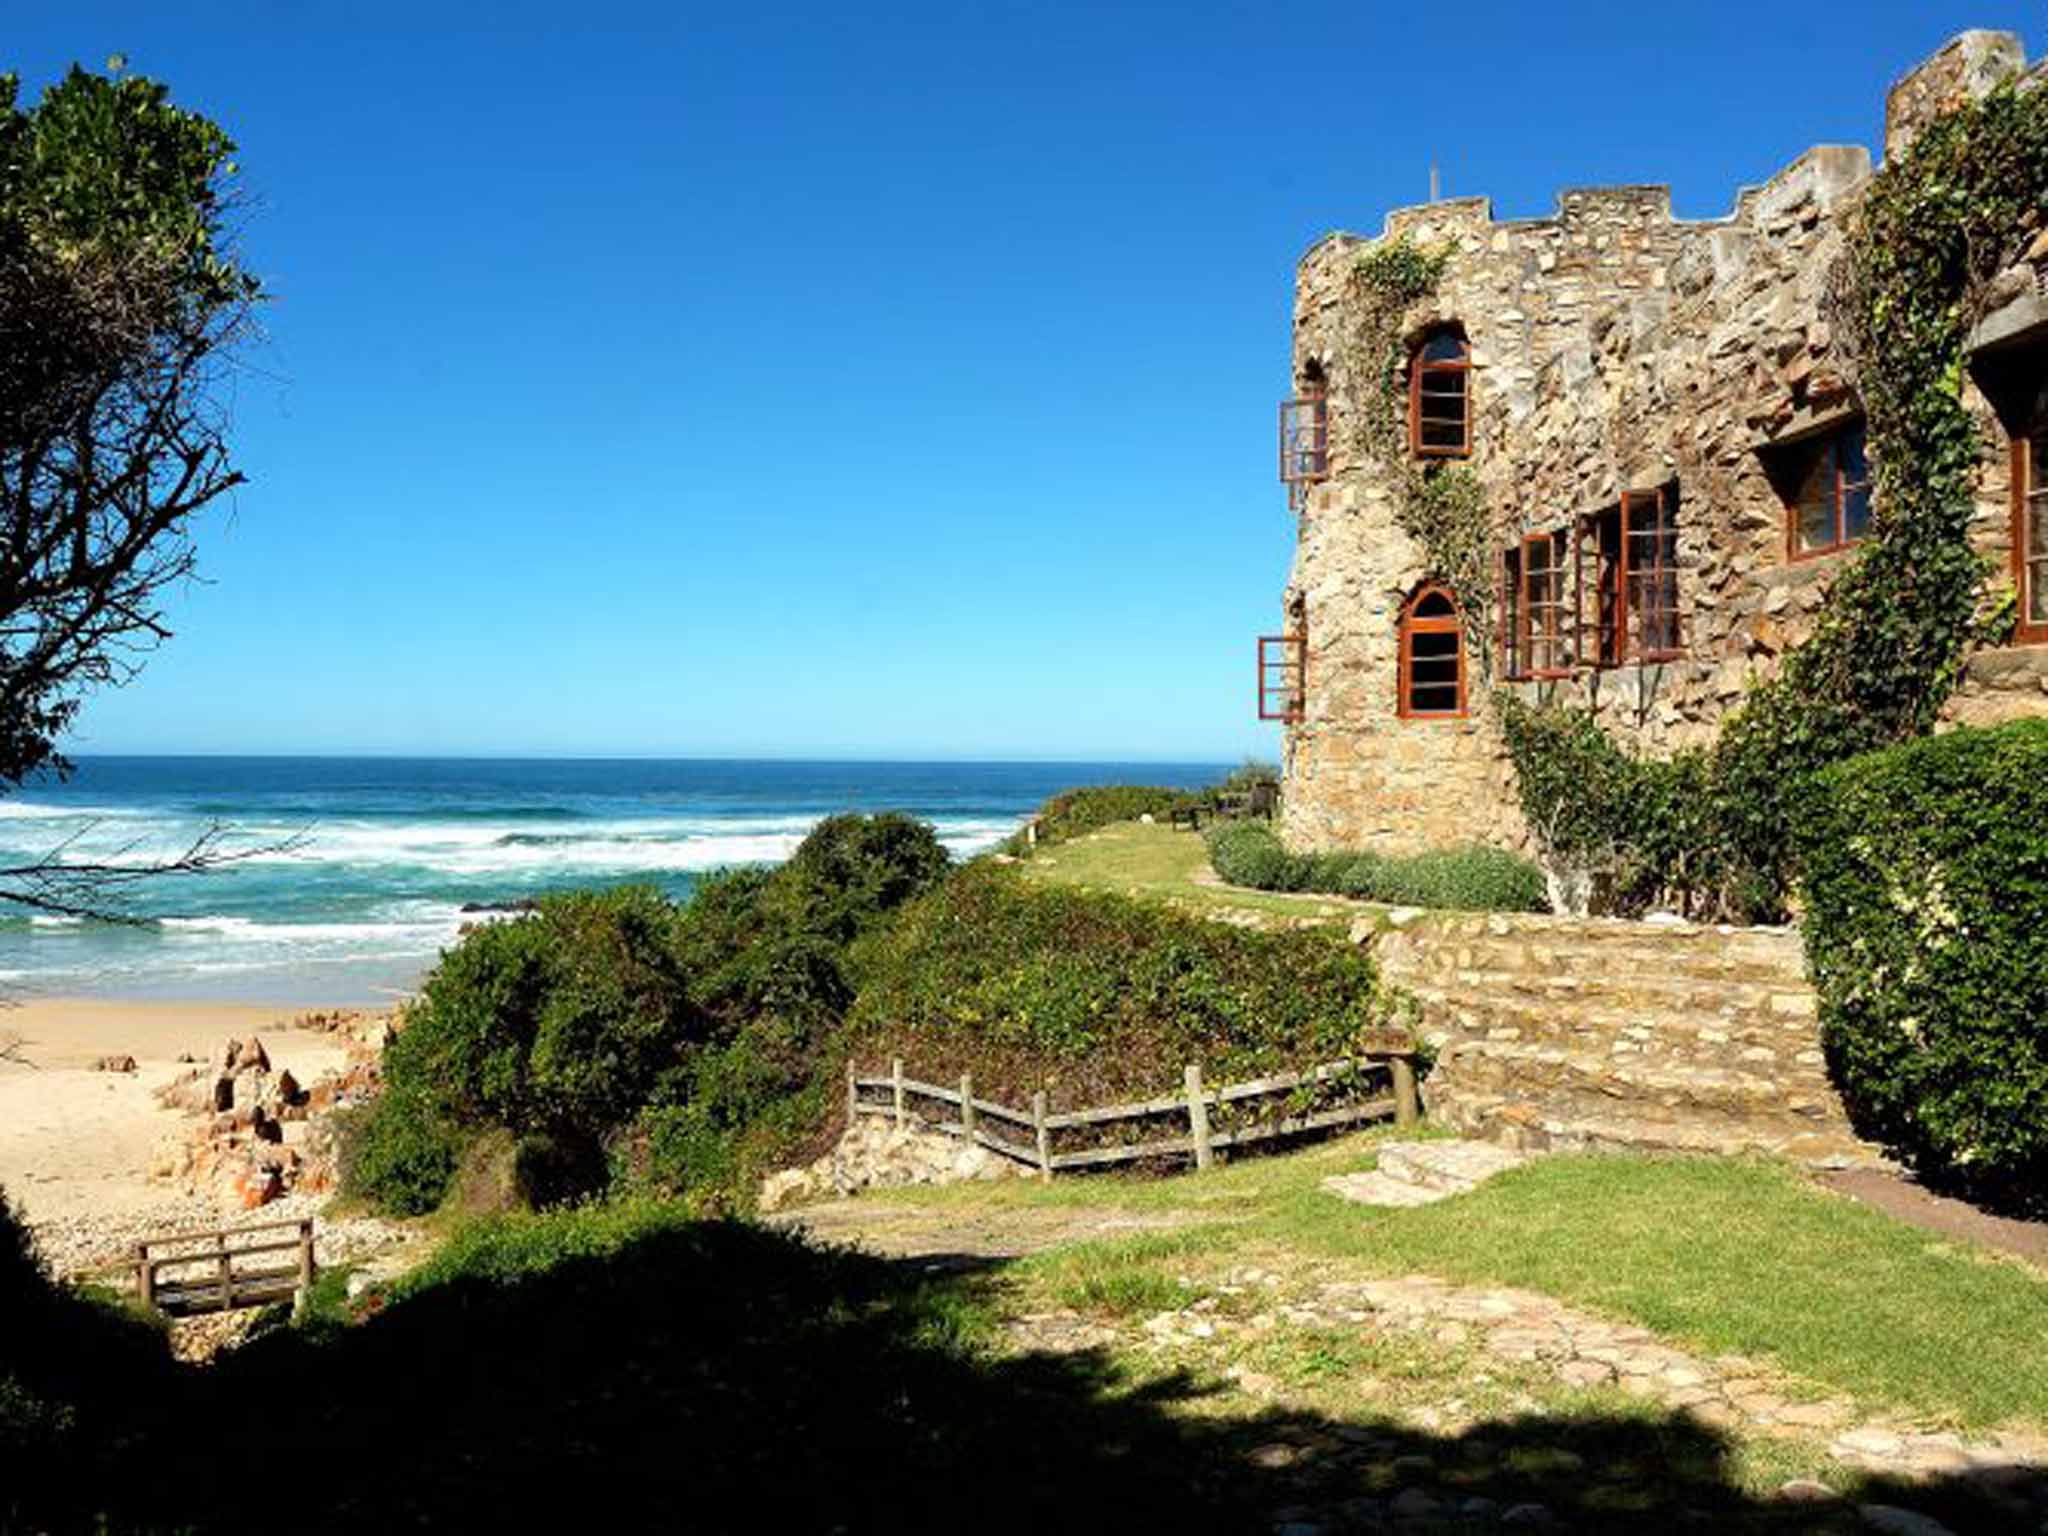 One of the castles which were built on the secluded Noetzie beach